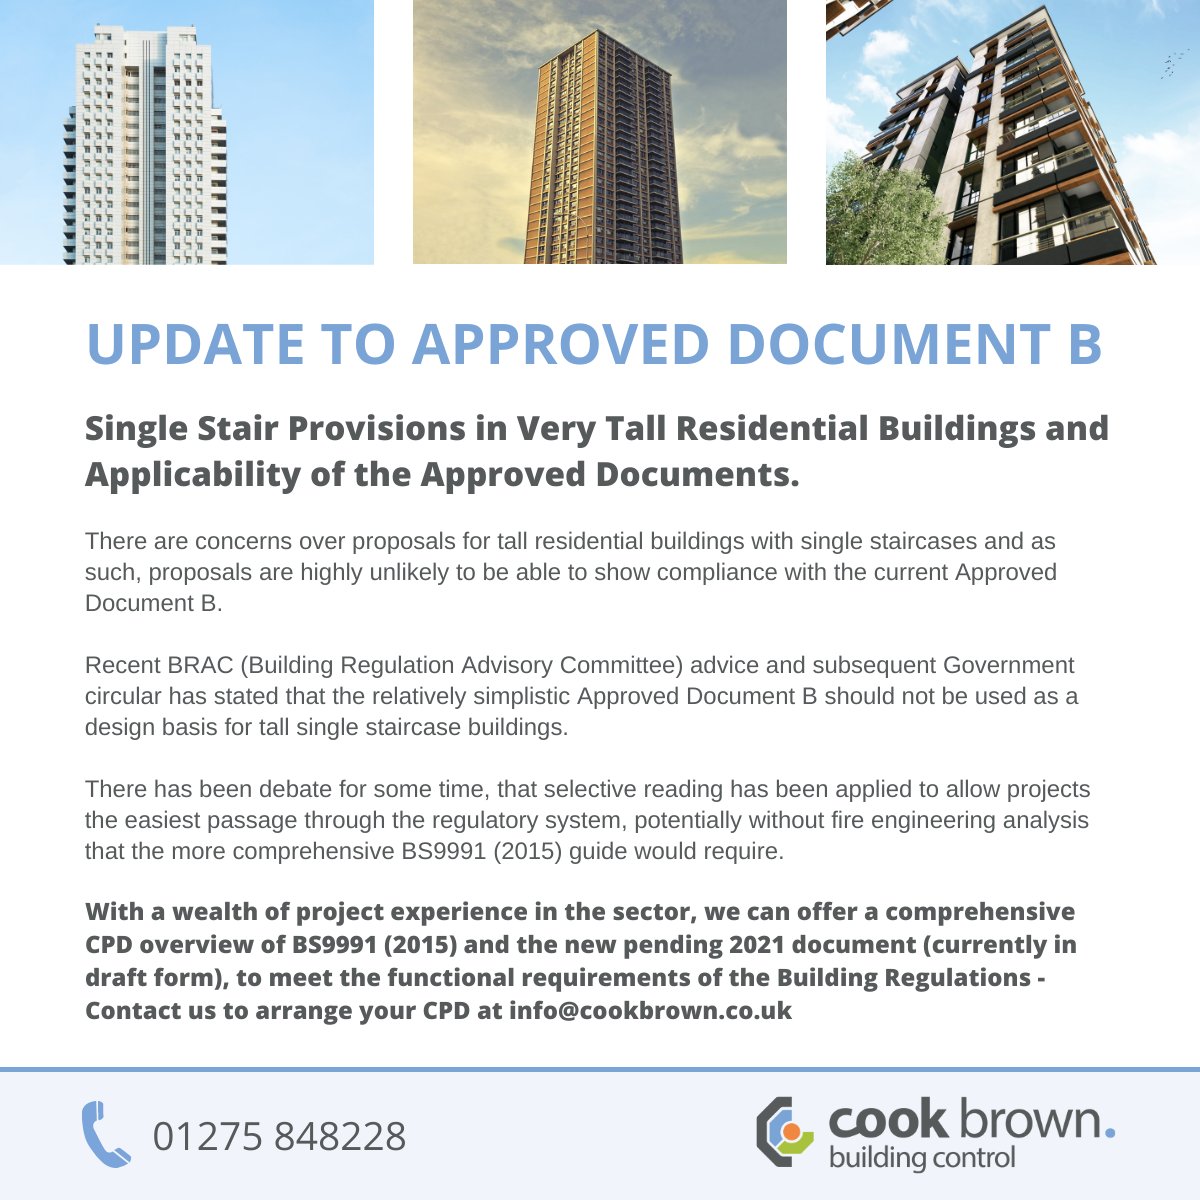 We would like to share with you the latest update to Approved Document B - Single Stair Provisions in Very Tall Residential Buildings and Applicability of the Approved Documents.

#ApprovedDocumentB #CookBrown #BuildingControl #BuildingRegulations